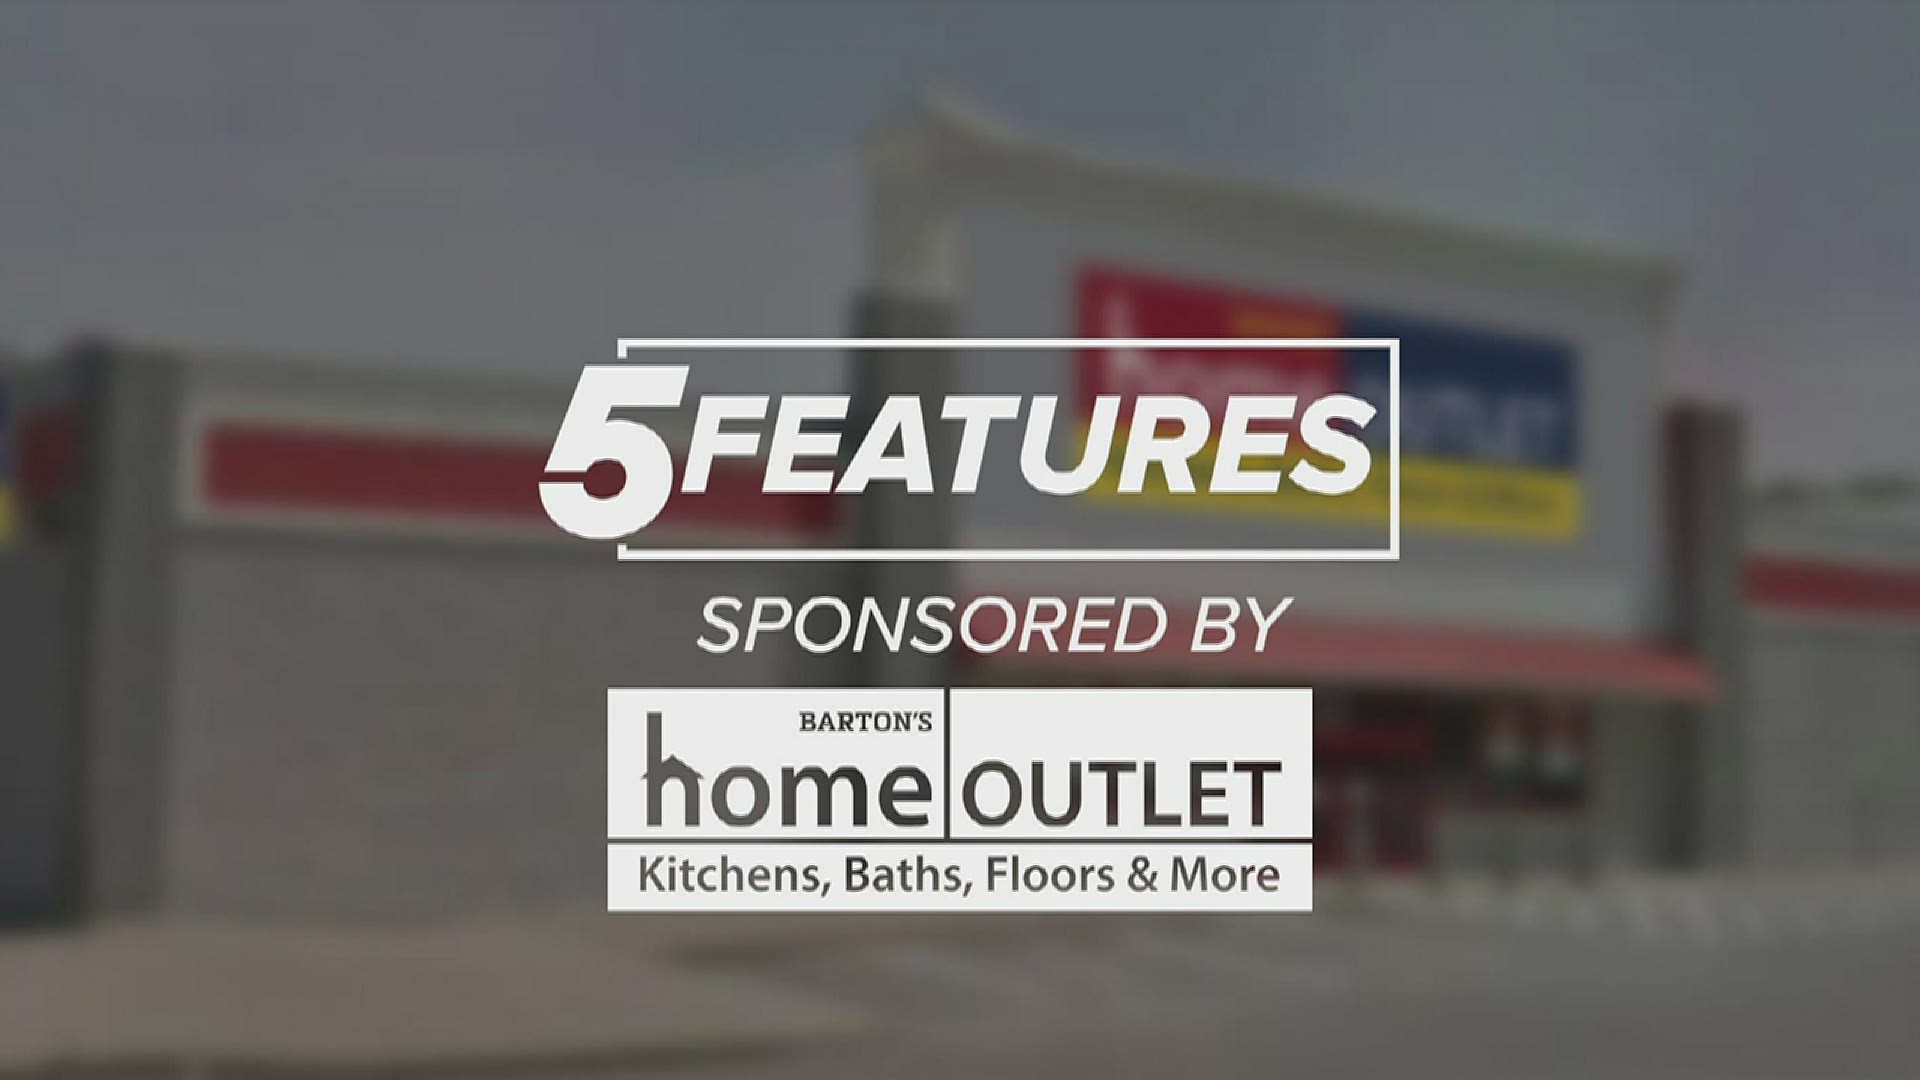 Sponsored by: Home Outlet Fort Smith